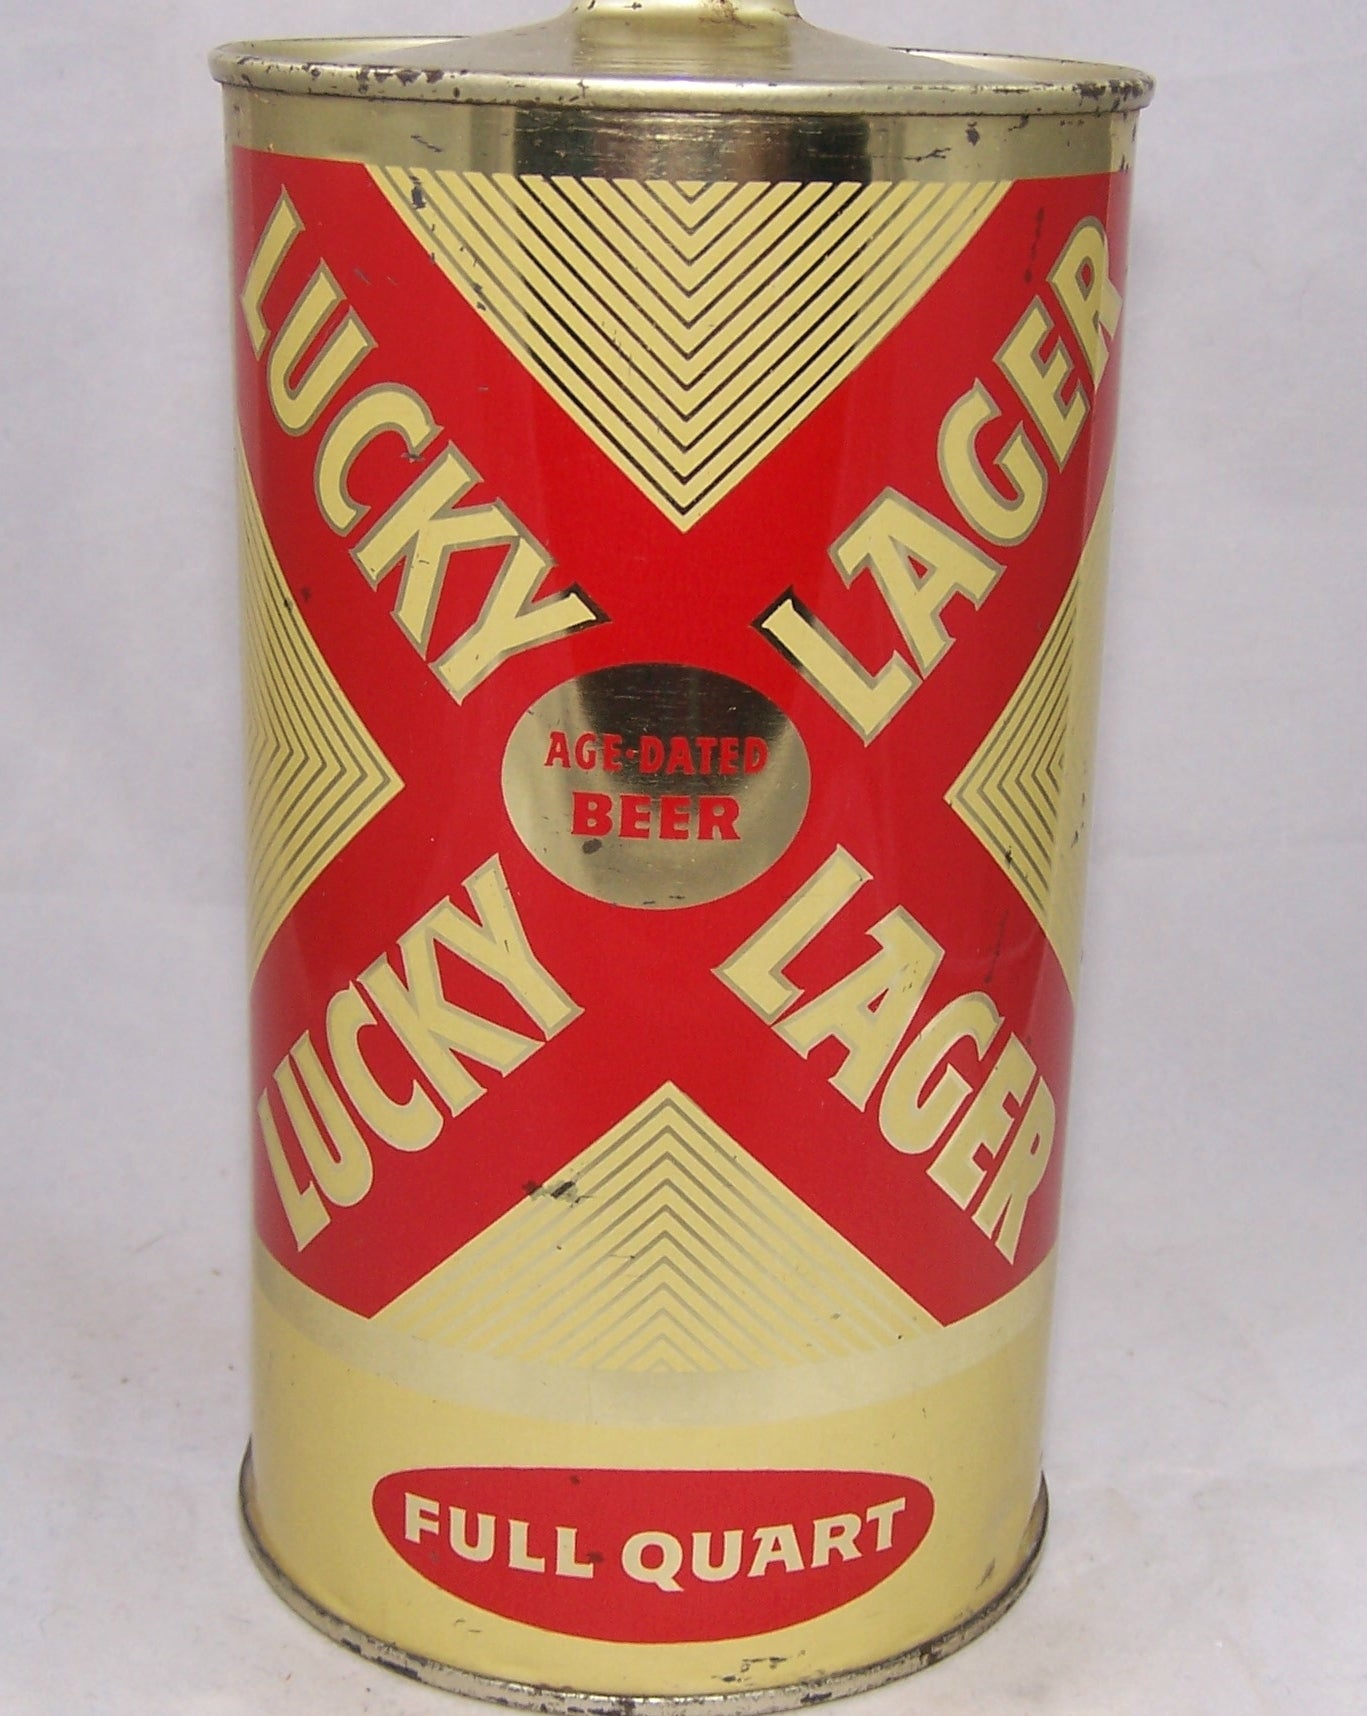 Lucky Lager Age Dated Beer, USBC 214-12, Grade 1/1+ Sold on 10/22/17